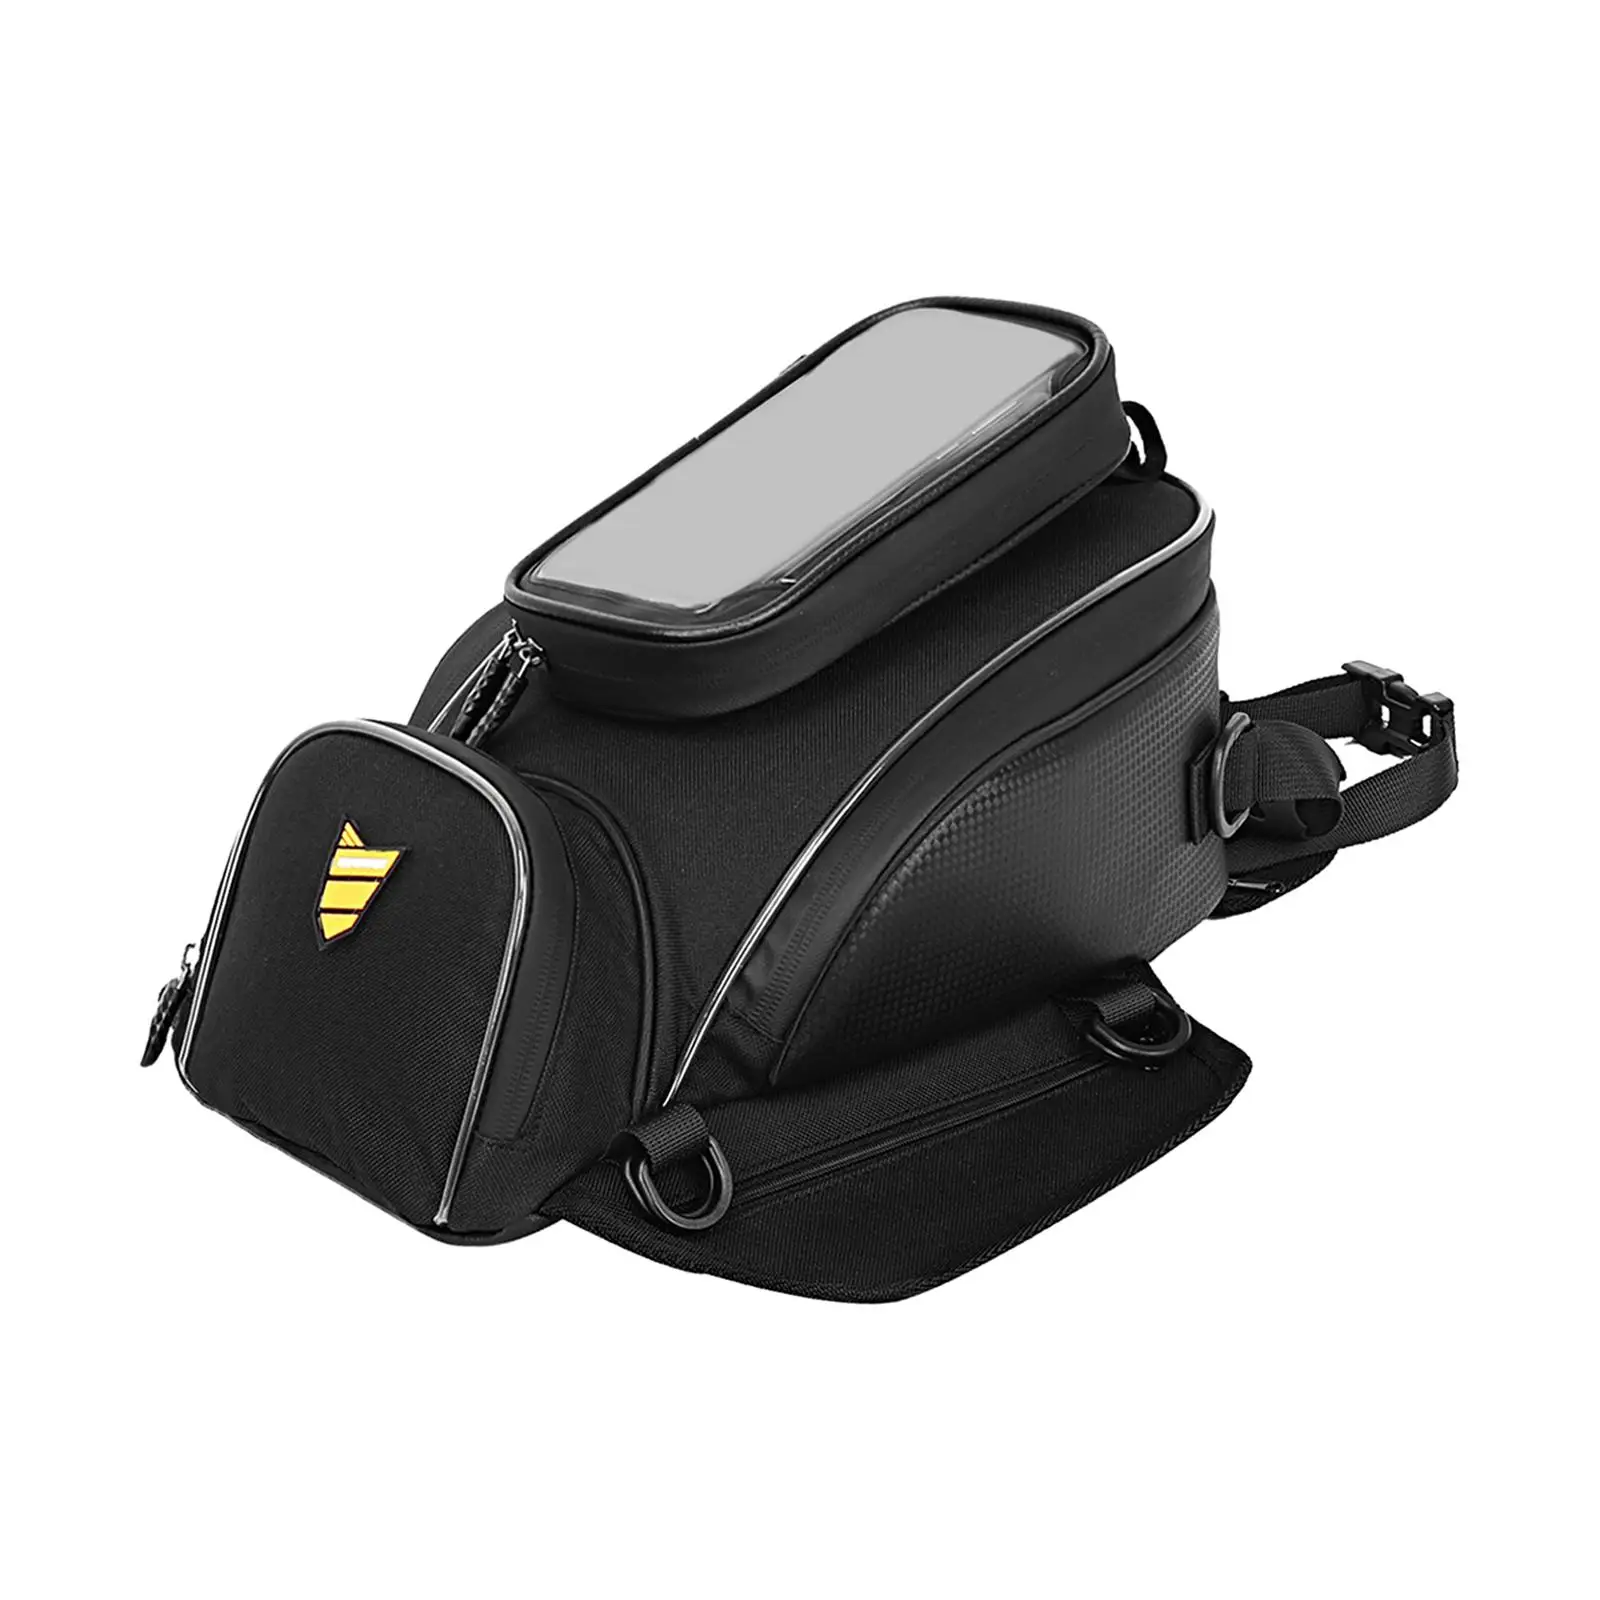 Motorcycle Fuel Tank Bag Water Resistant Accessory for Outdoor Sports Riding